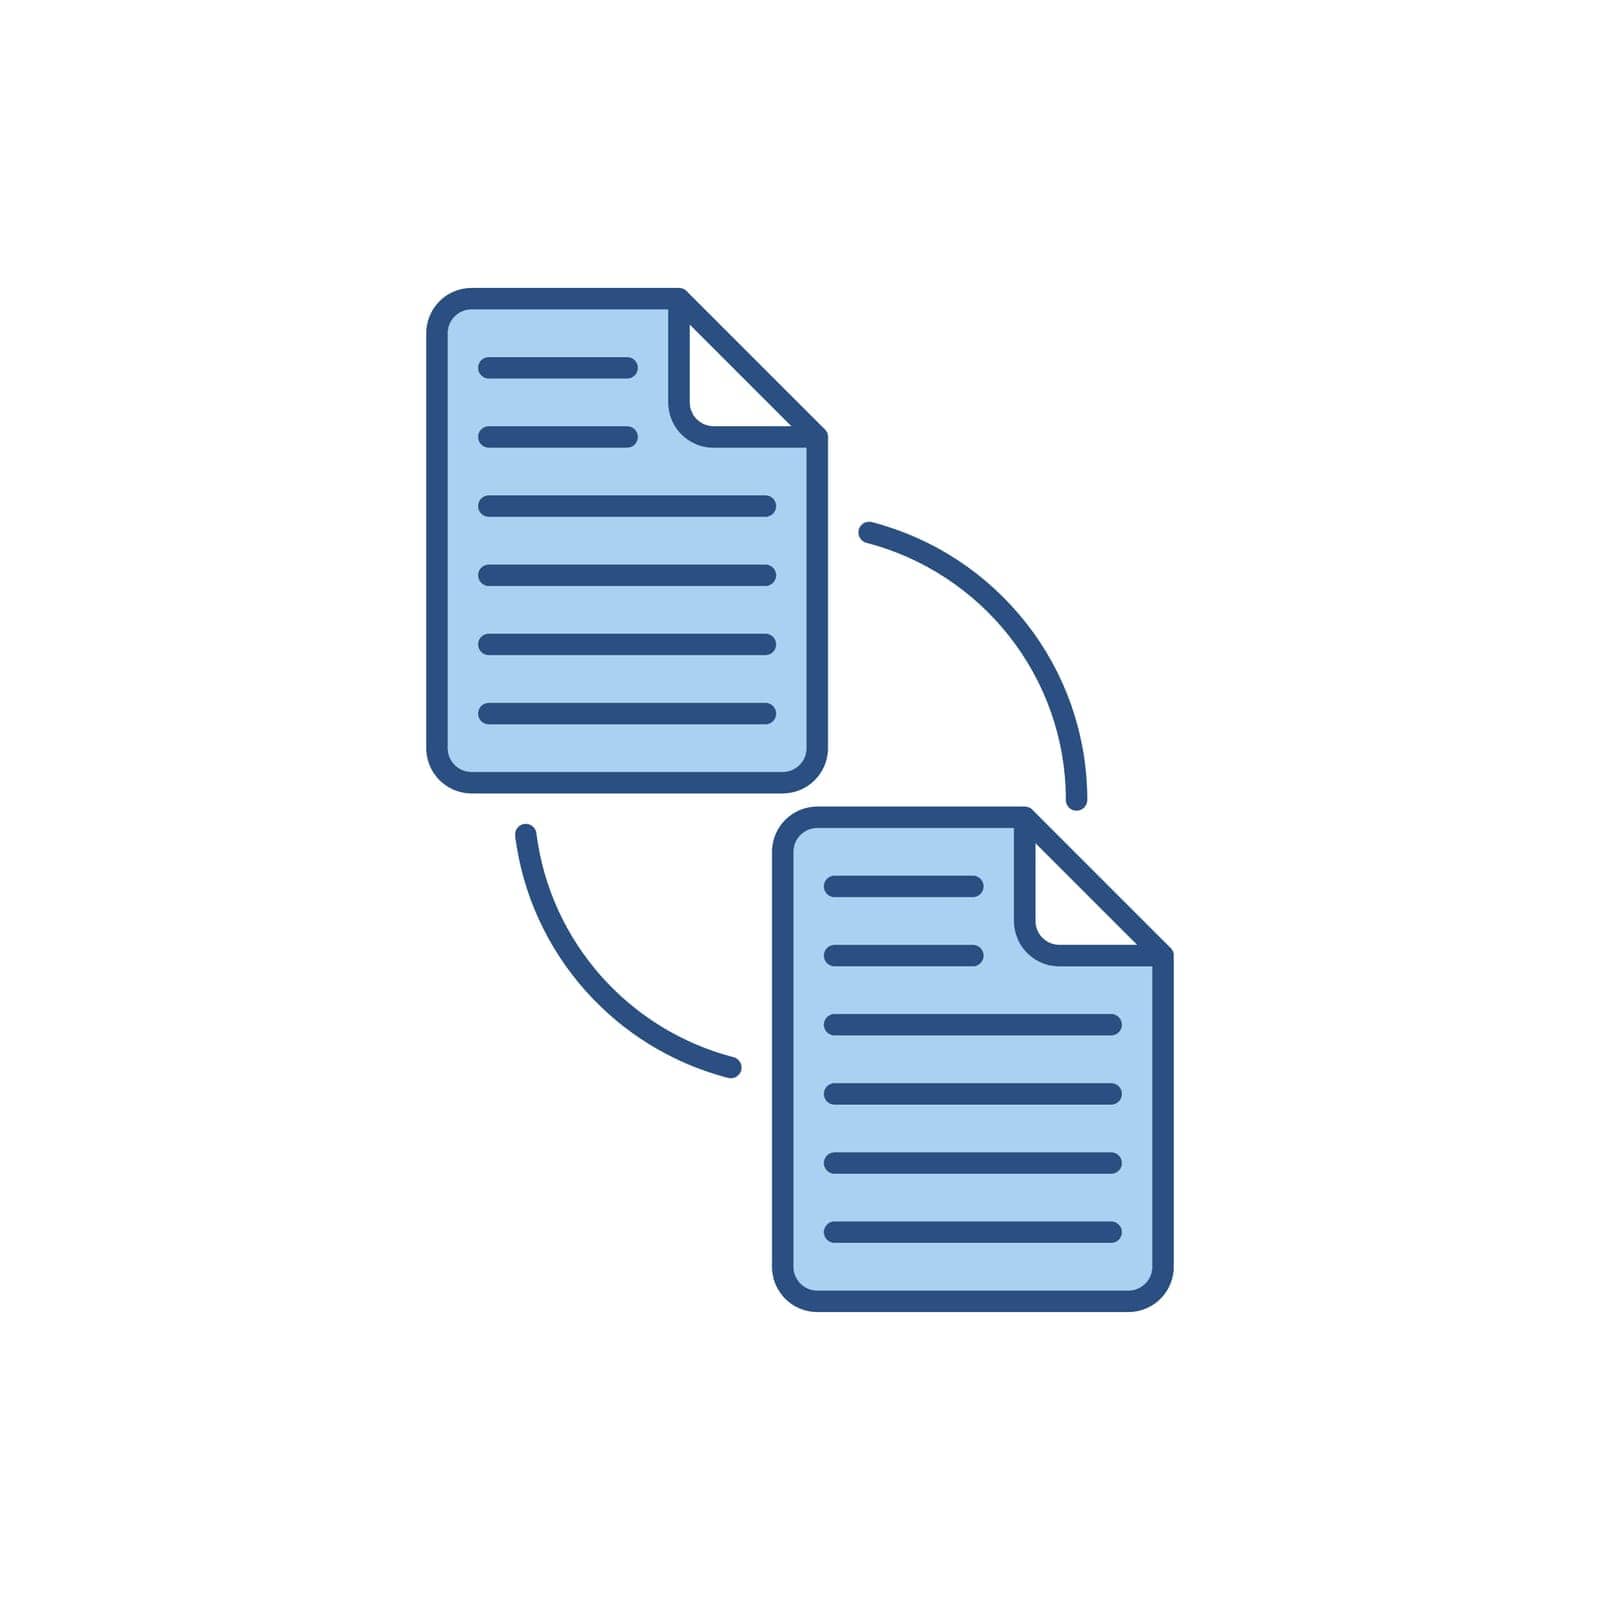 File Exchange related vector icon by smoki